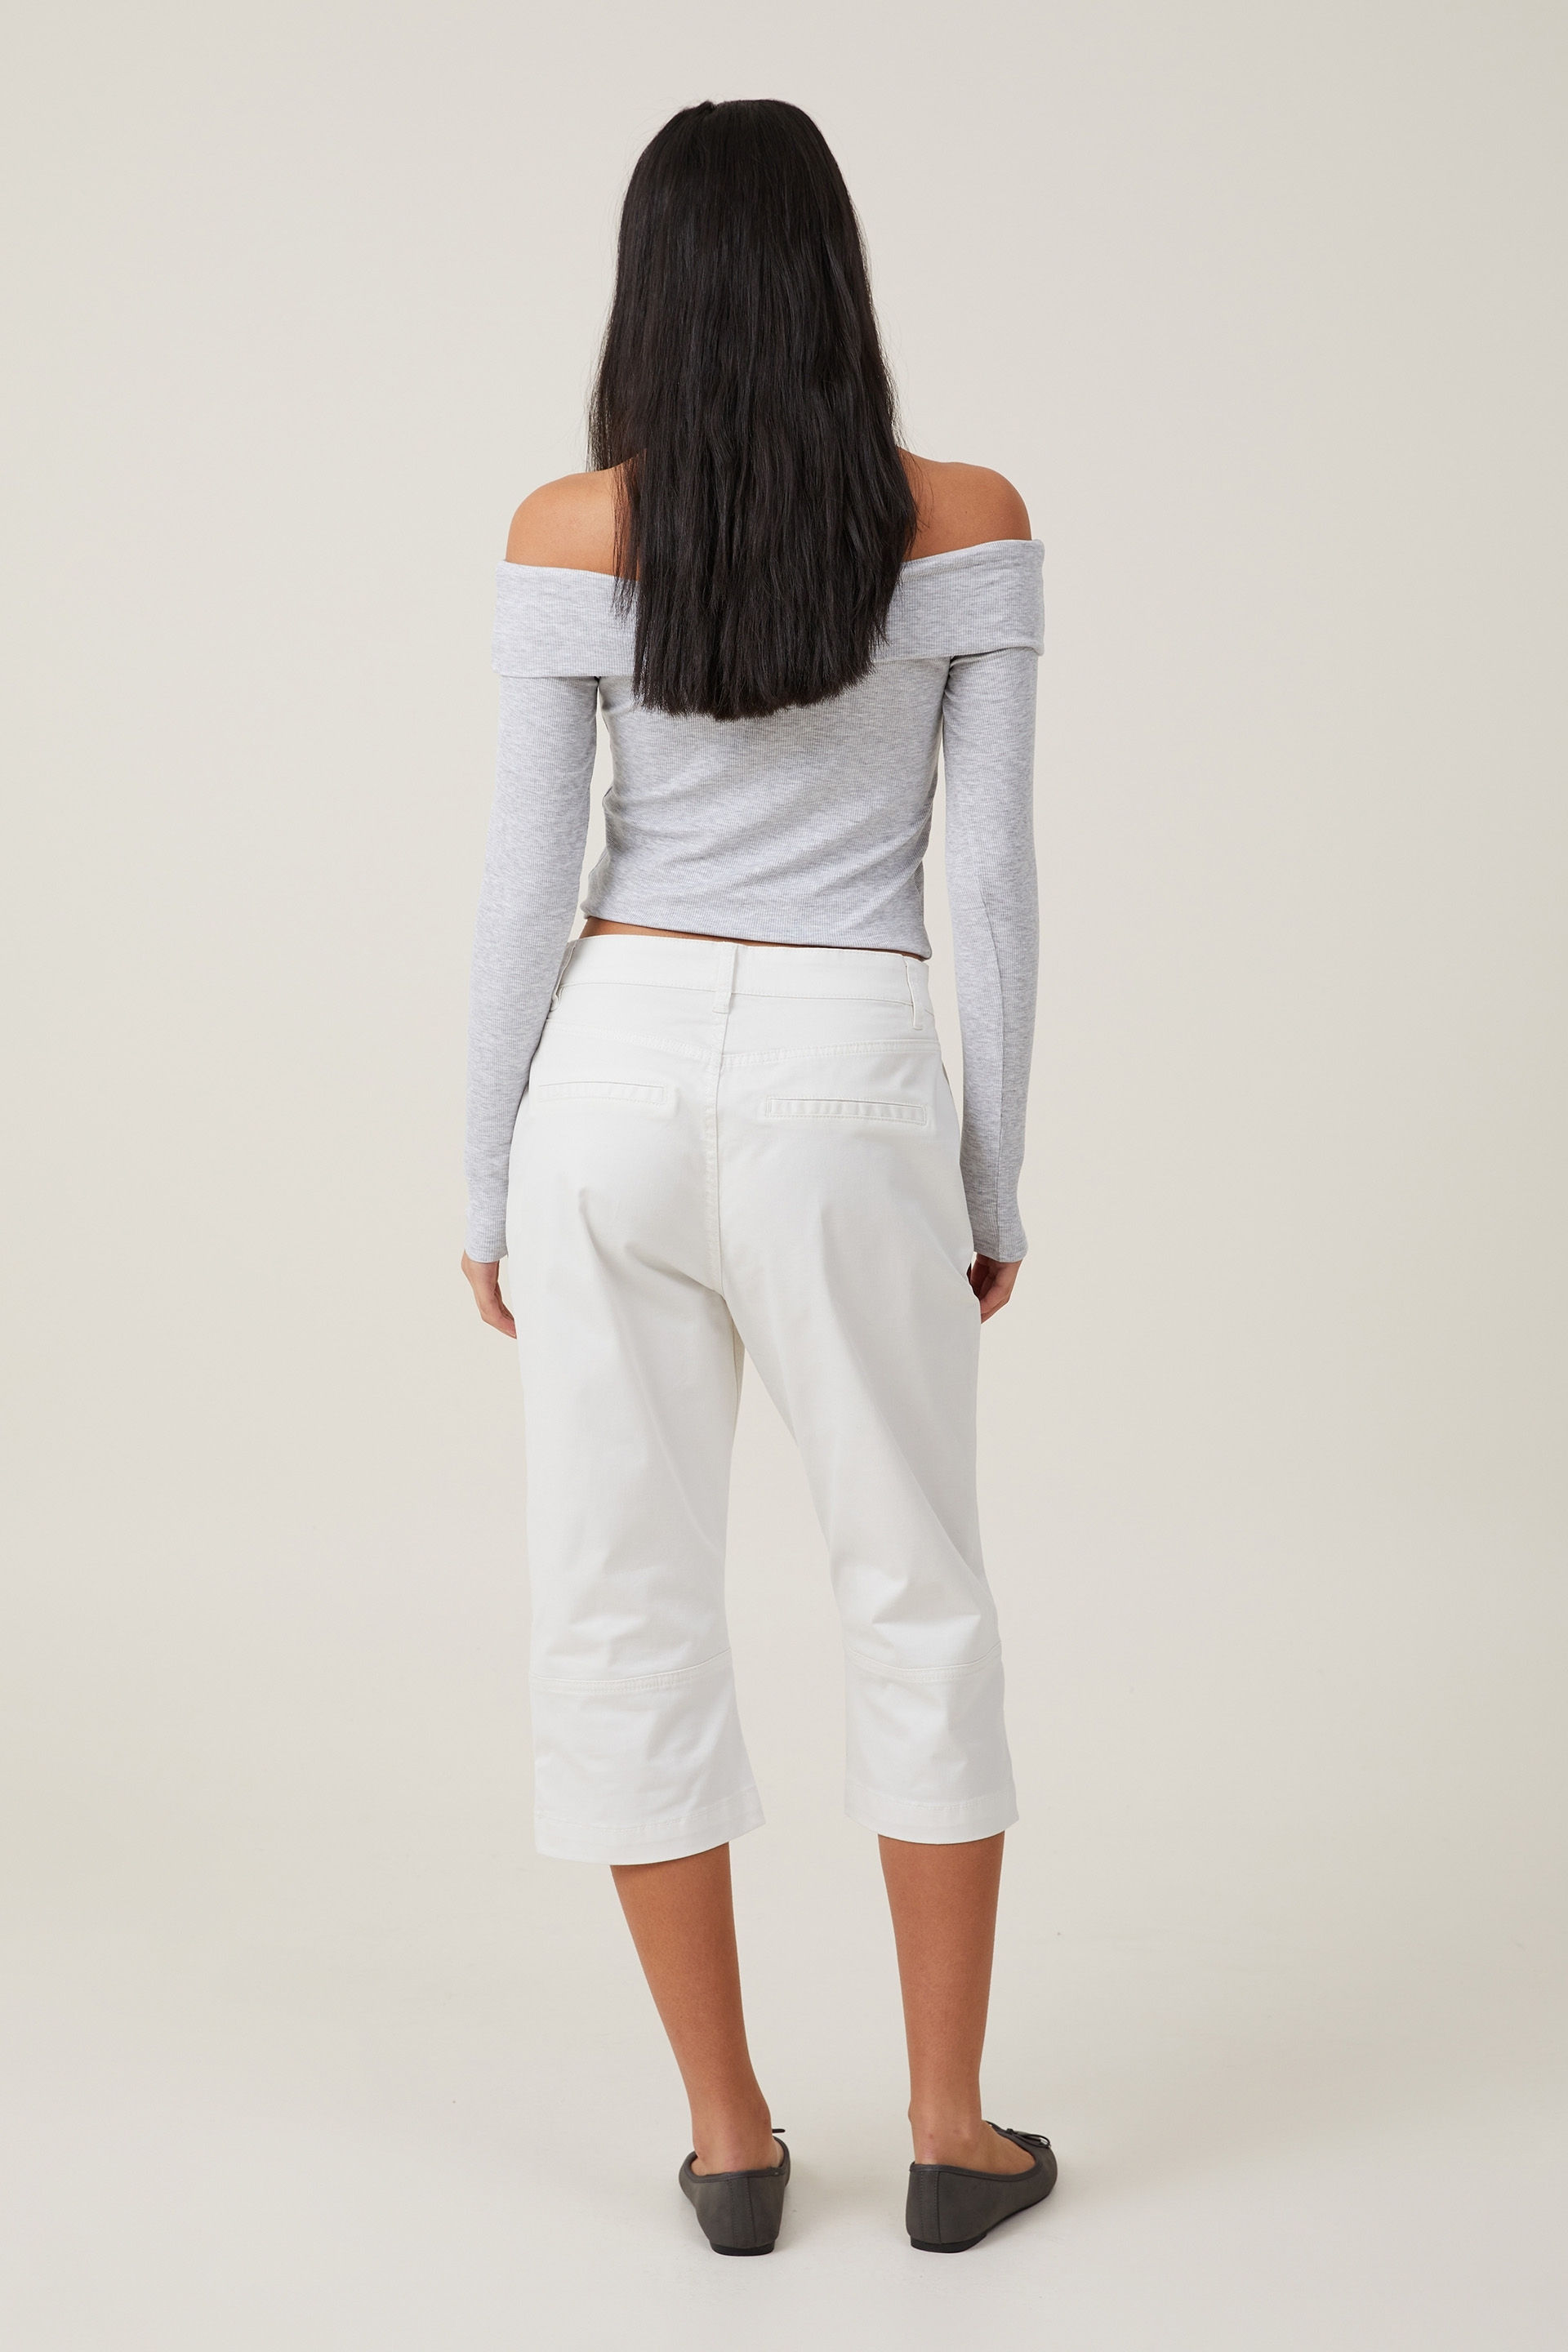 Mama & Bebe Solid Stretchable Capri Pants With Adjustable Waist Cream  Online in India, Buy at Best Price from Firstcry.com - 12025583